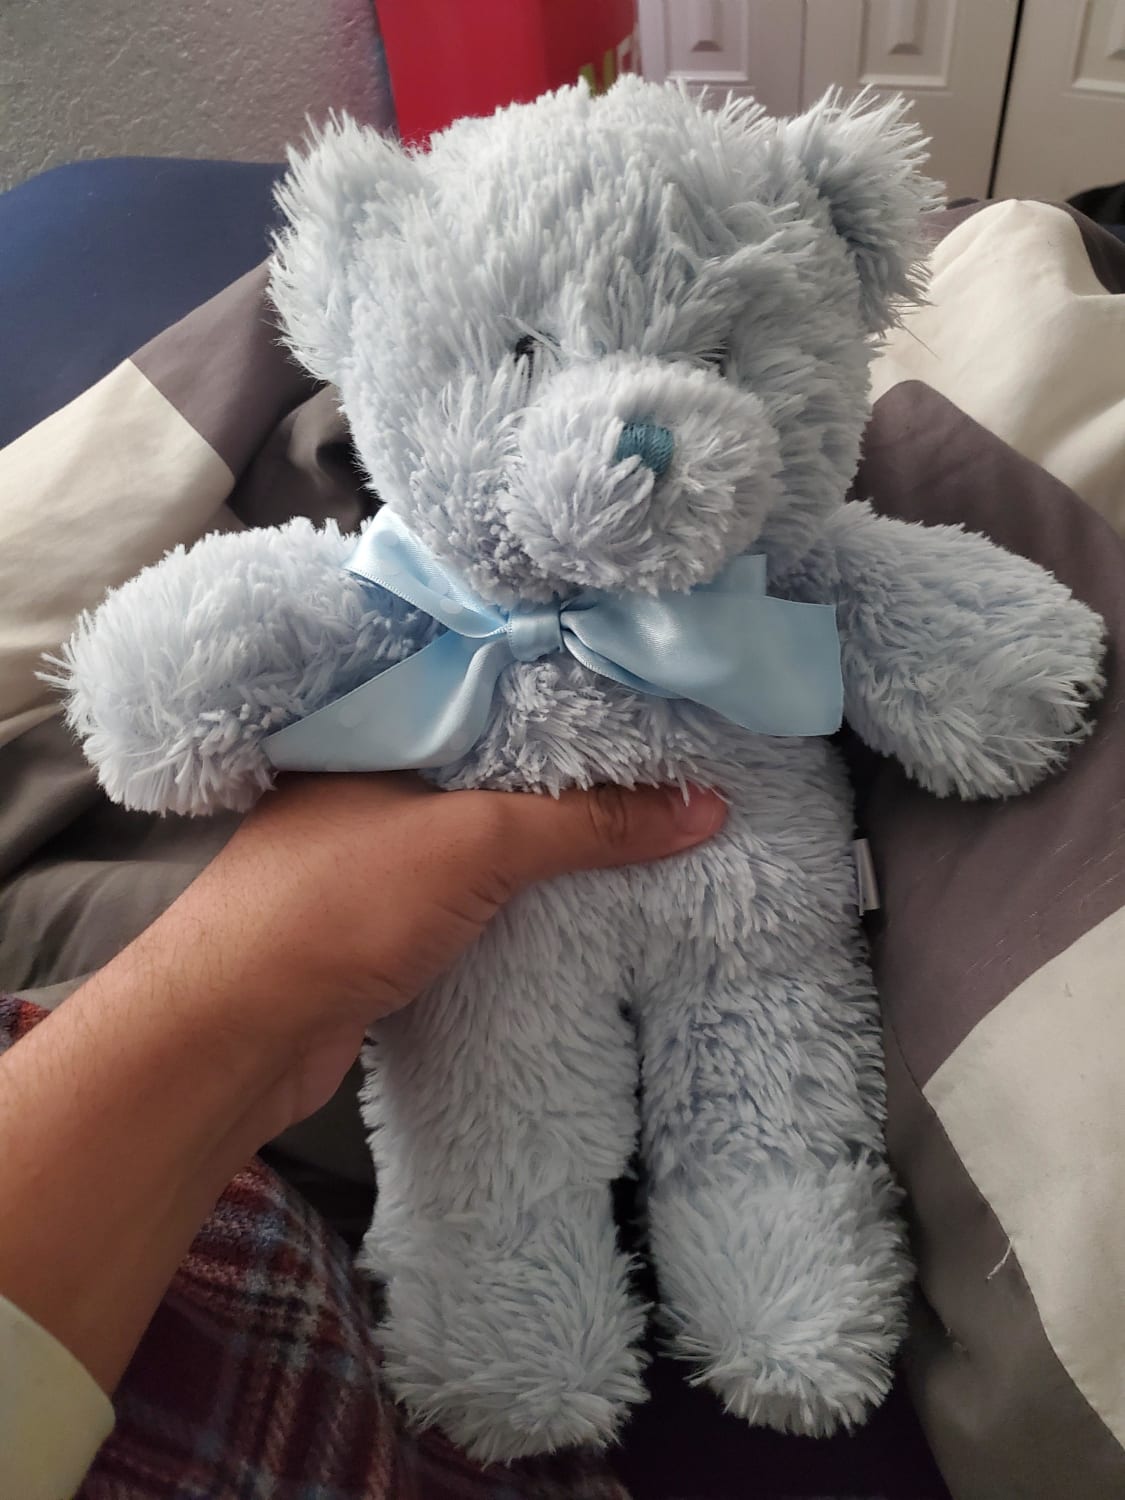 When I was 13 my mother purposely burnt a blue teddy bear I had to teach me a lesson. For the past 10 years it haunted me. My girlfriend surprised me with this bear as a pure gesture of kindness. Now I am a 23 year old Male with a Teddy Bear and have no shame! I am so grateful for my girlfriend!